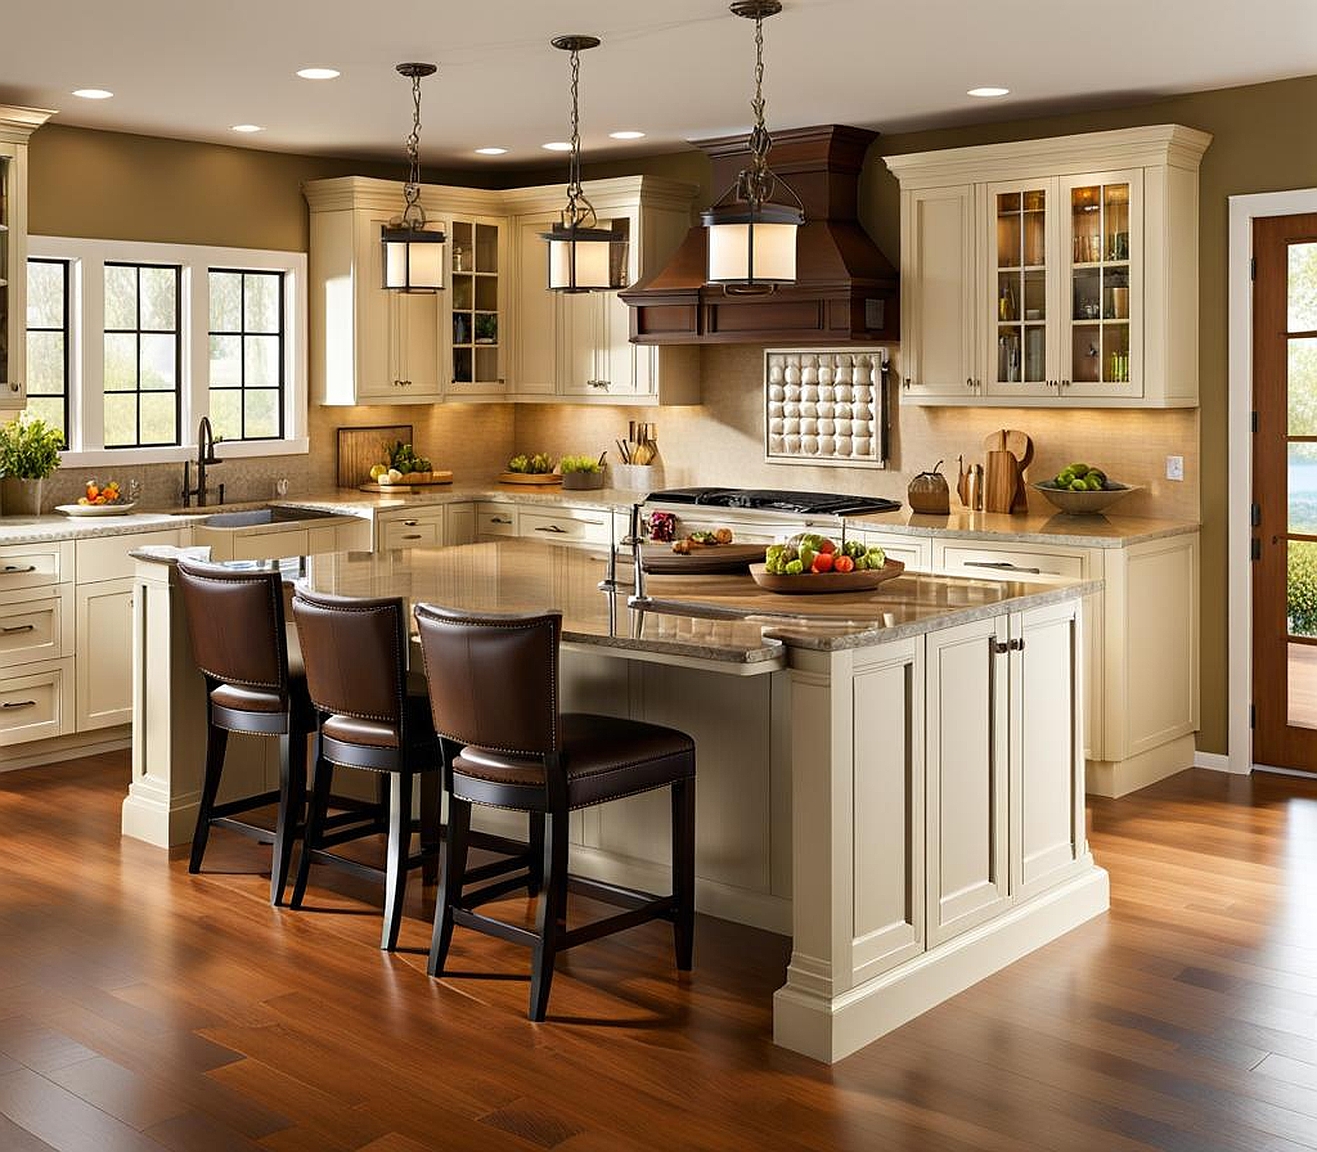 The Essential Guide to Buying a Kitchen Island for Your Dream Home